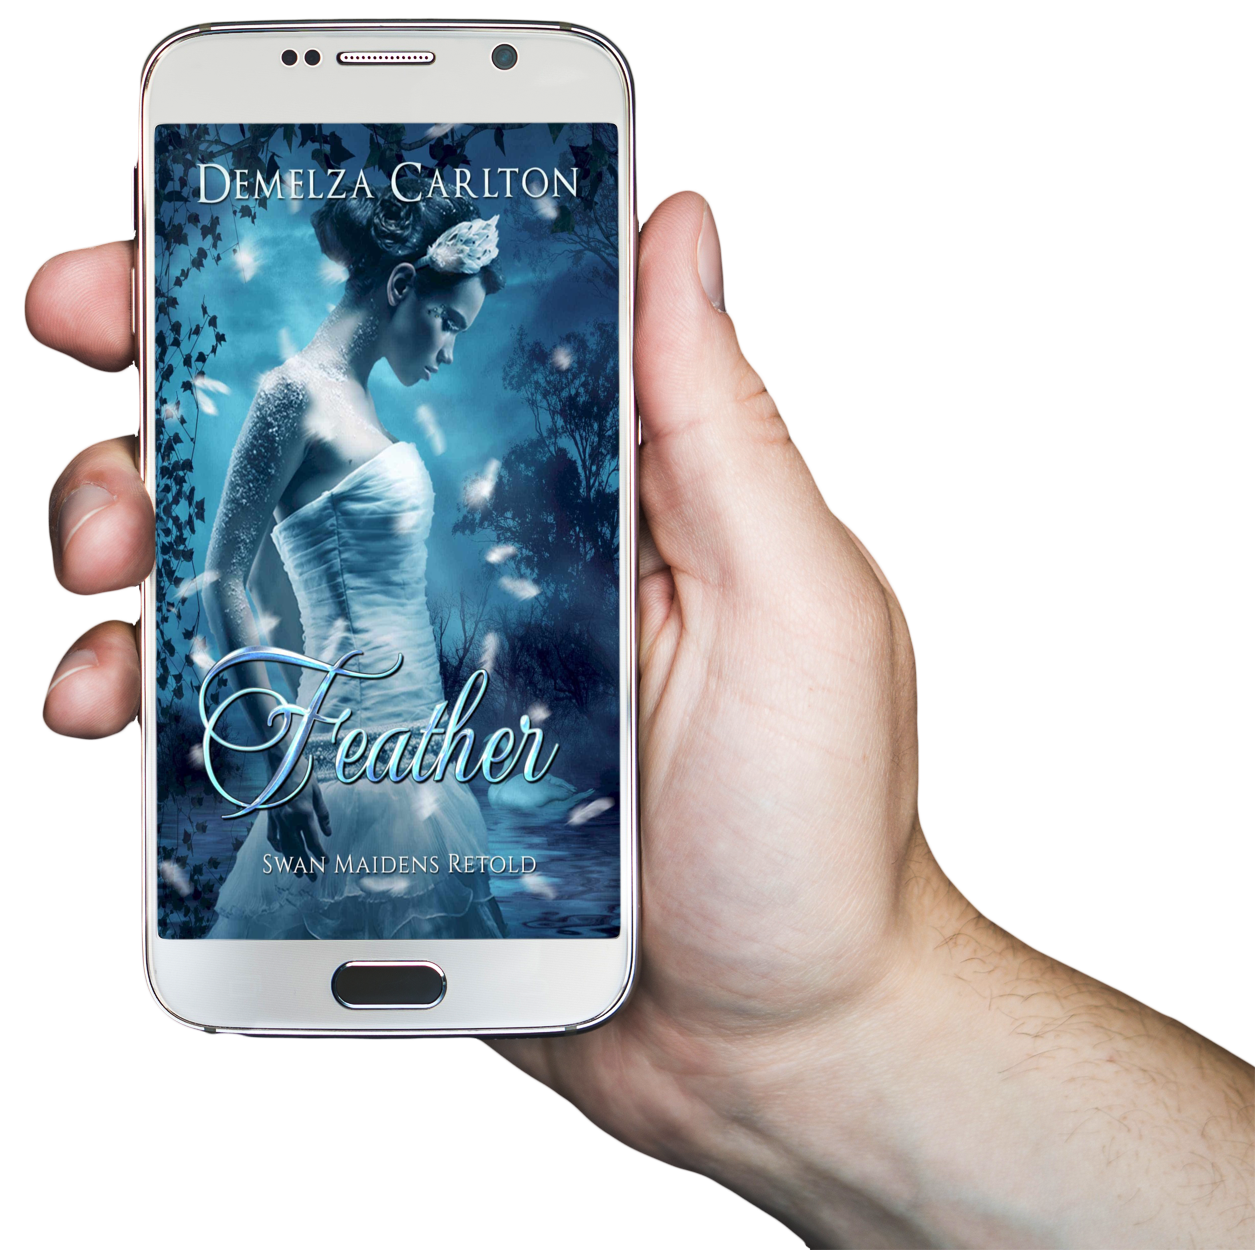 Feather: Swan Maidens Retold Book 22 in the Romance a Medieval Fairytale series by USA Today Bestselling Author Demelza Carlton ebook